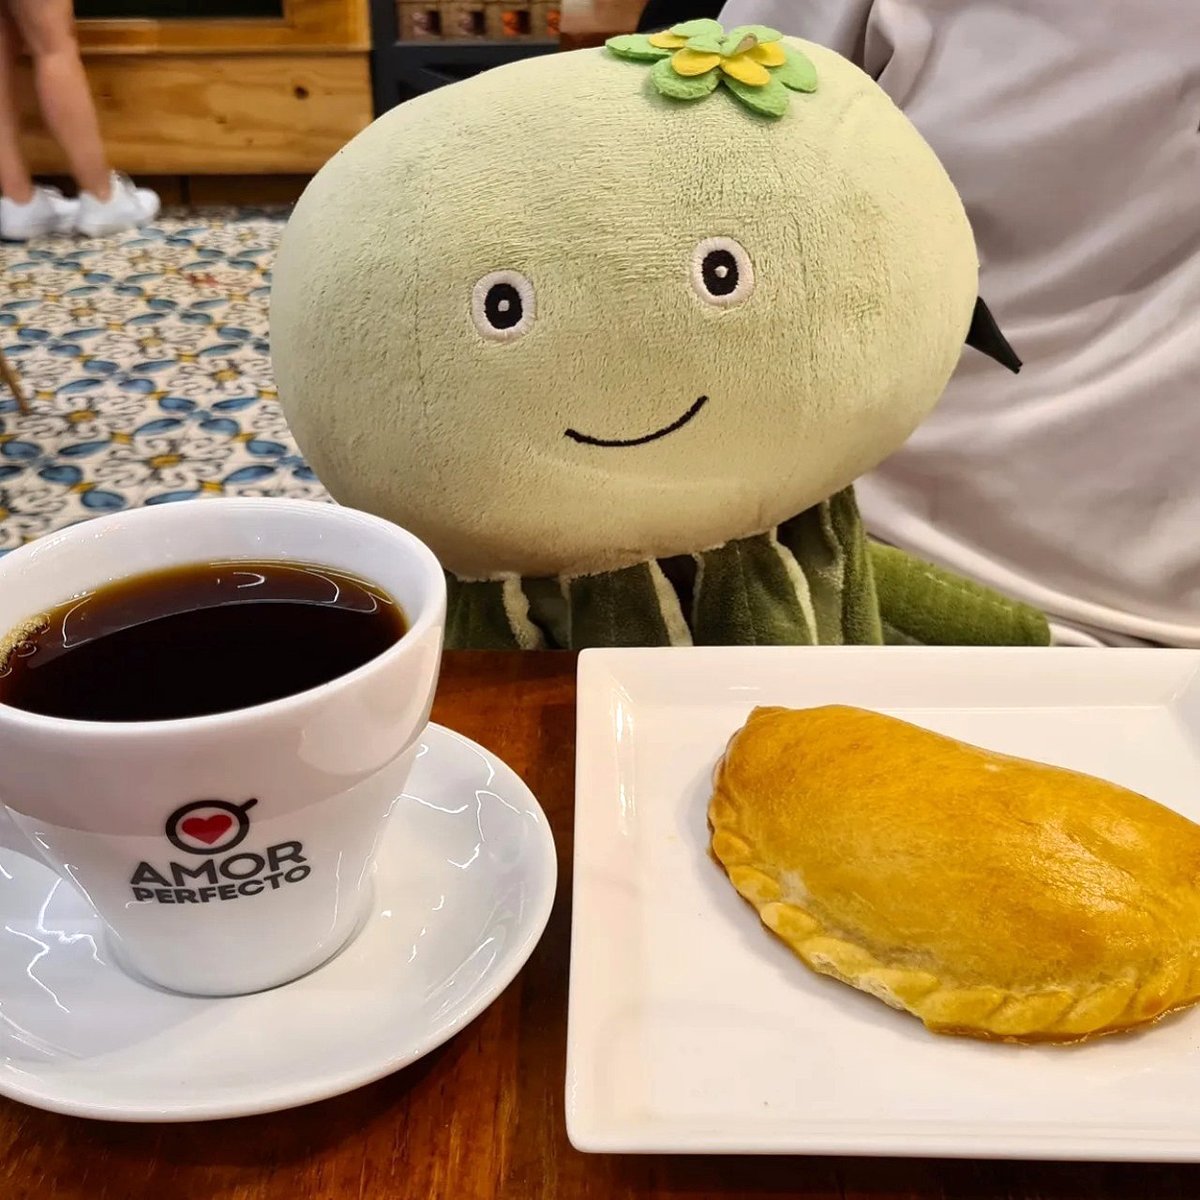 BLOG LINK: cliffy-goes-dining.blogspot.com/2024/05/pan-lu…

Tried #Panamanian #GeishaCoffee for the first time in #Lumaca!

#Panama #cafe #Geisha #Gesha #coffee #coconut #pineapple #smoothie #cheese #empanada #pastry #banana #bread #cake #sweet #dessert #eat #food #foodie #blog #foodblog #foodblogger